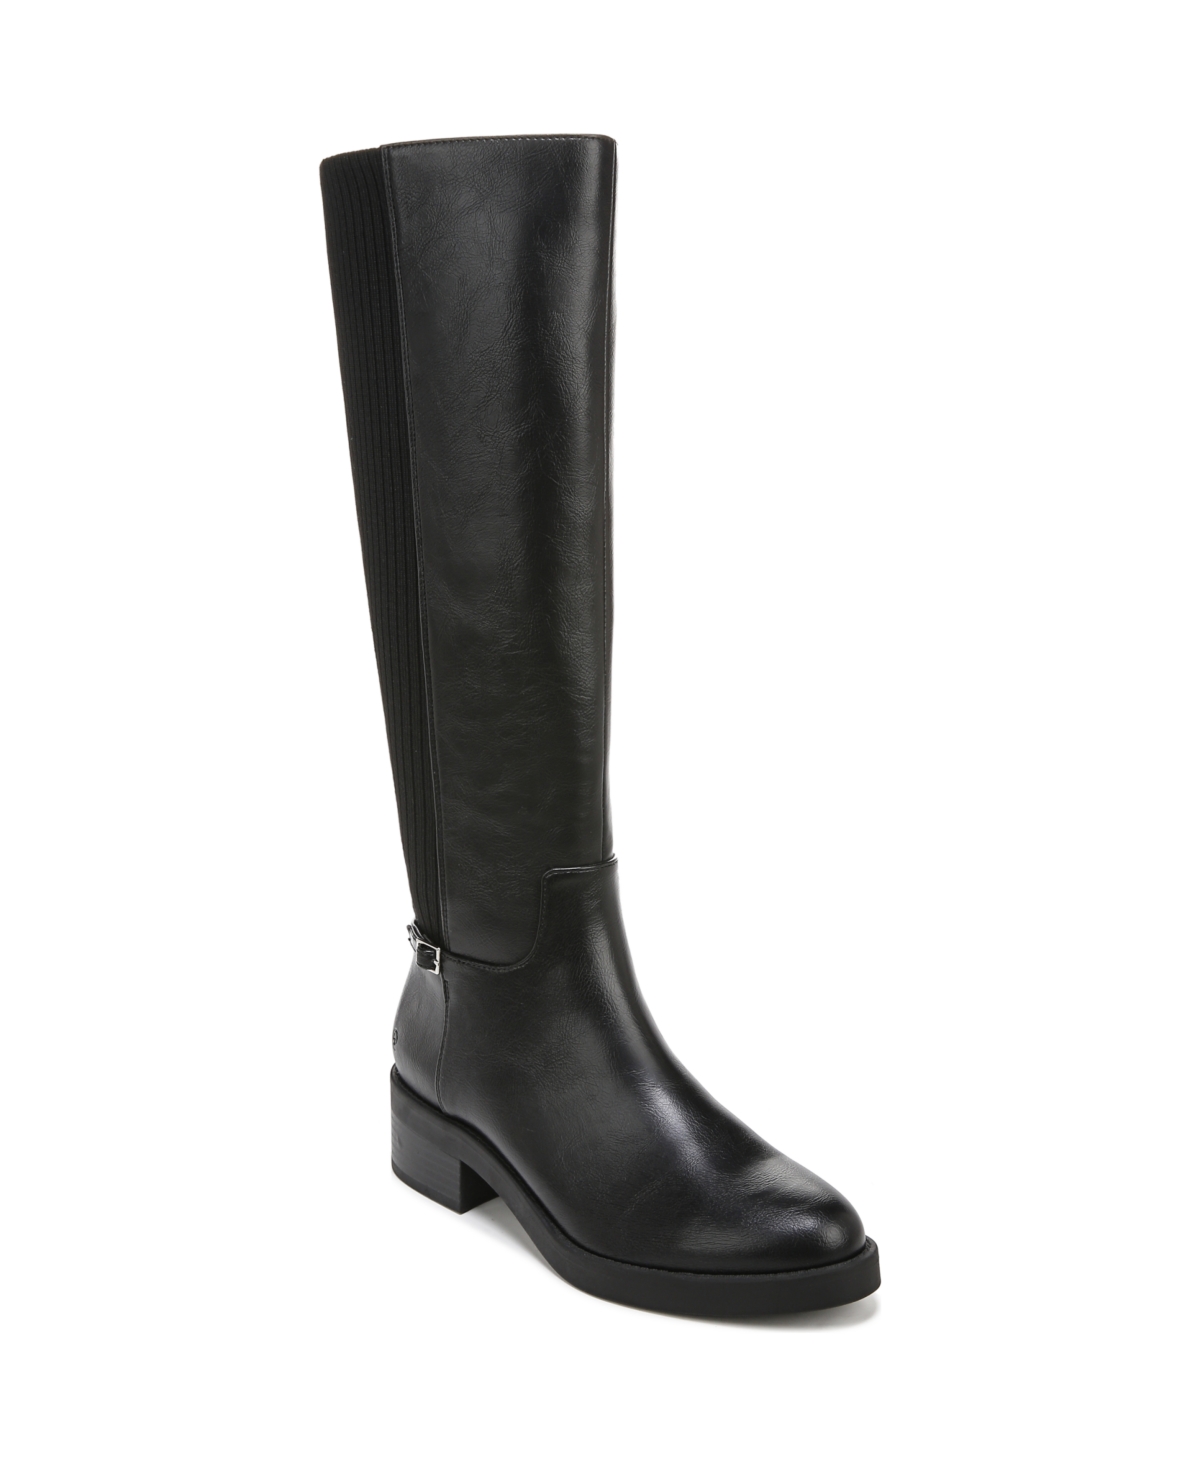 Bristol Knee High Boots - Walnut Brown Faux Leather